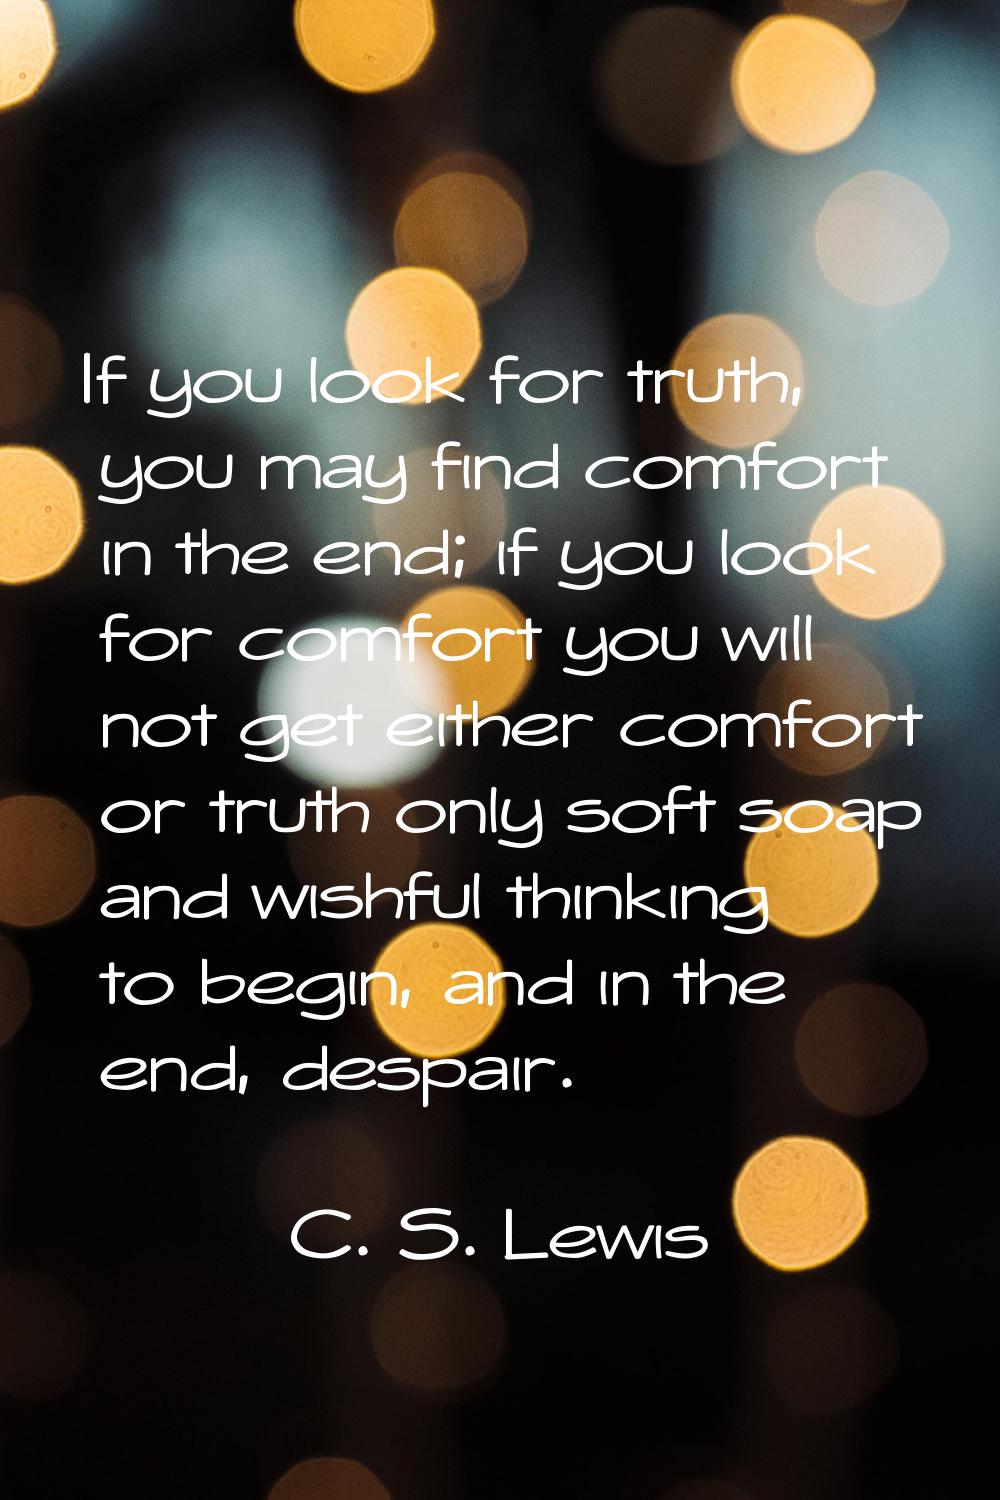 If you look for truth, you may find comfort in the end; if you look for comfort you will not get ei